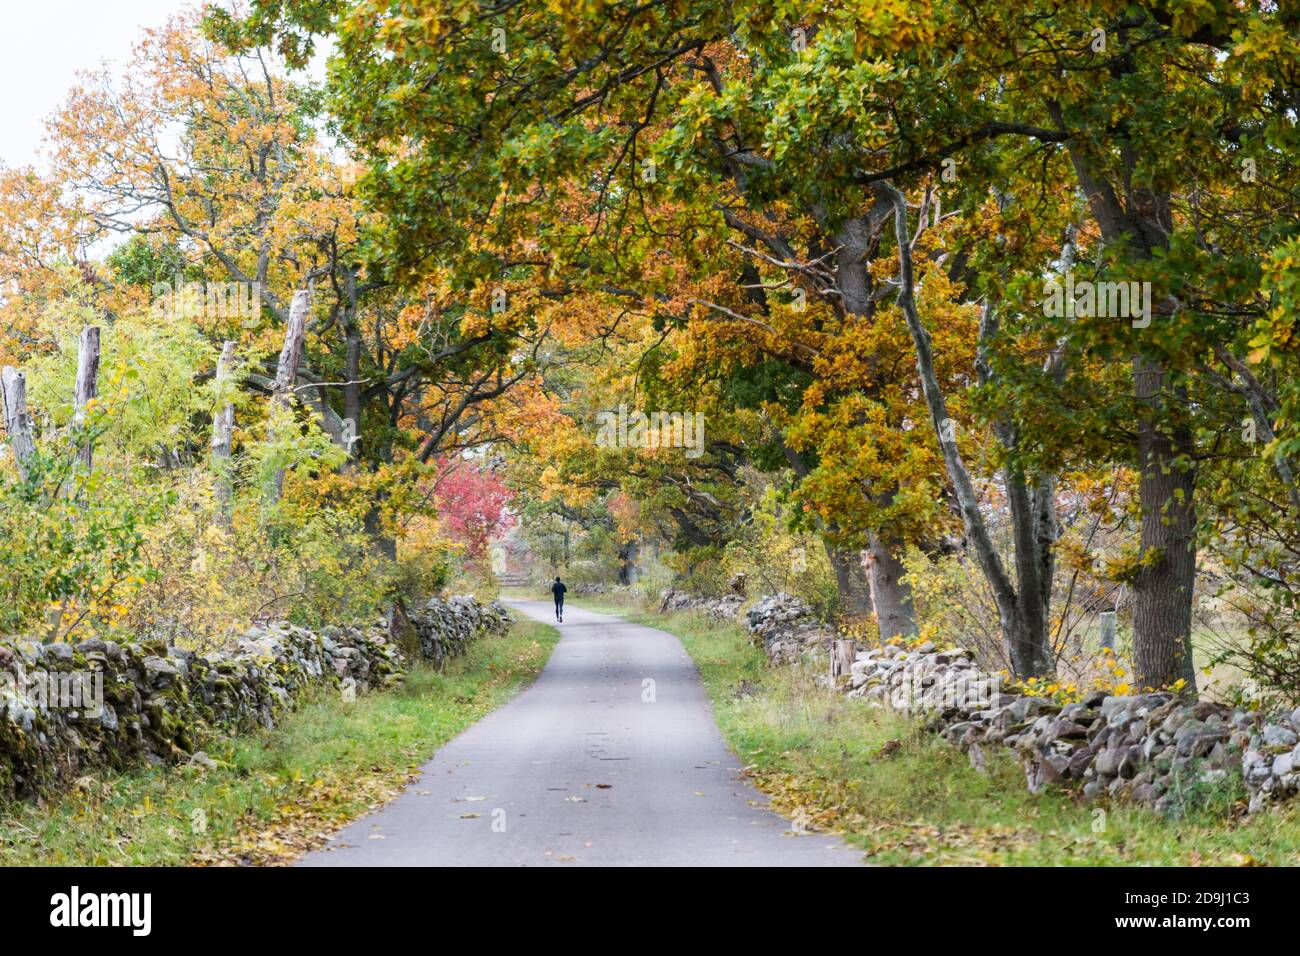 Country road surrounded by dry stone walls in fall colors Stock Photo